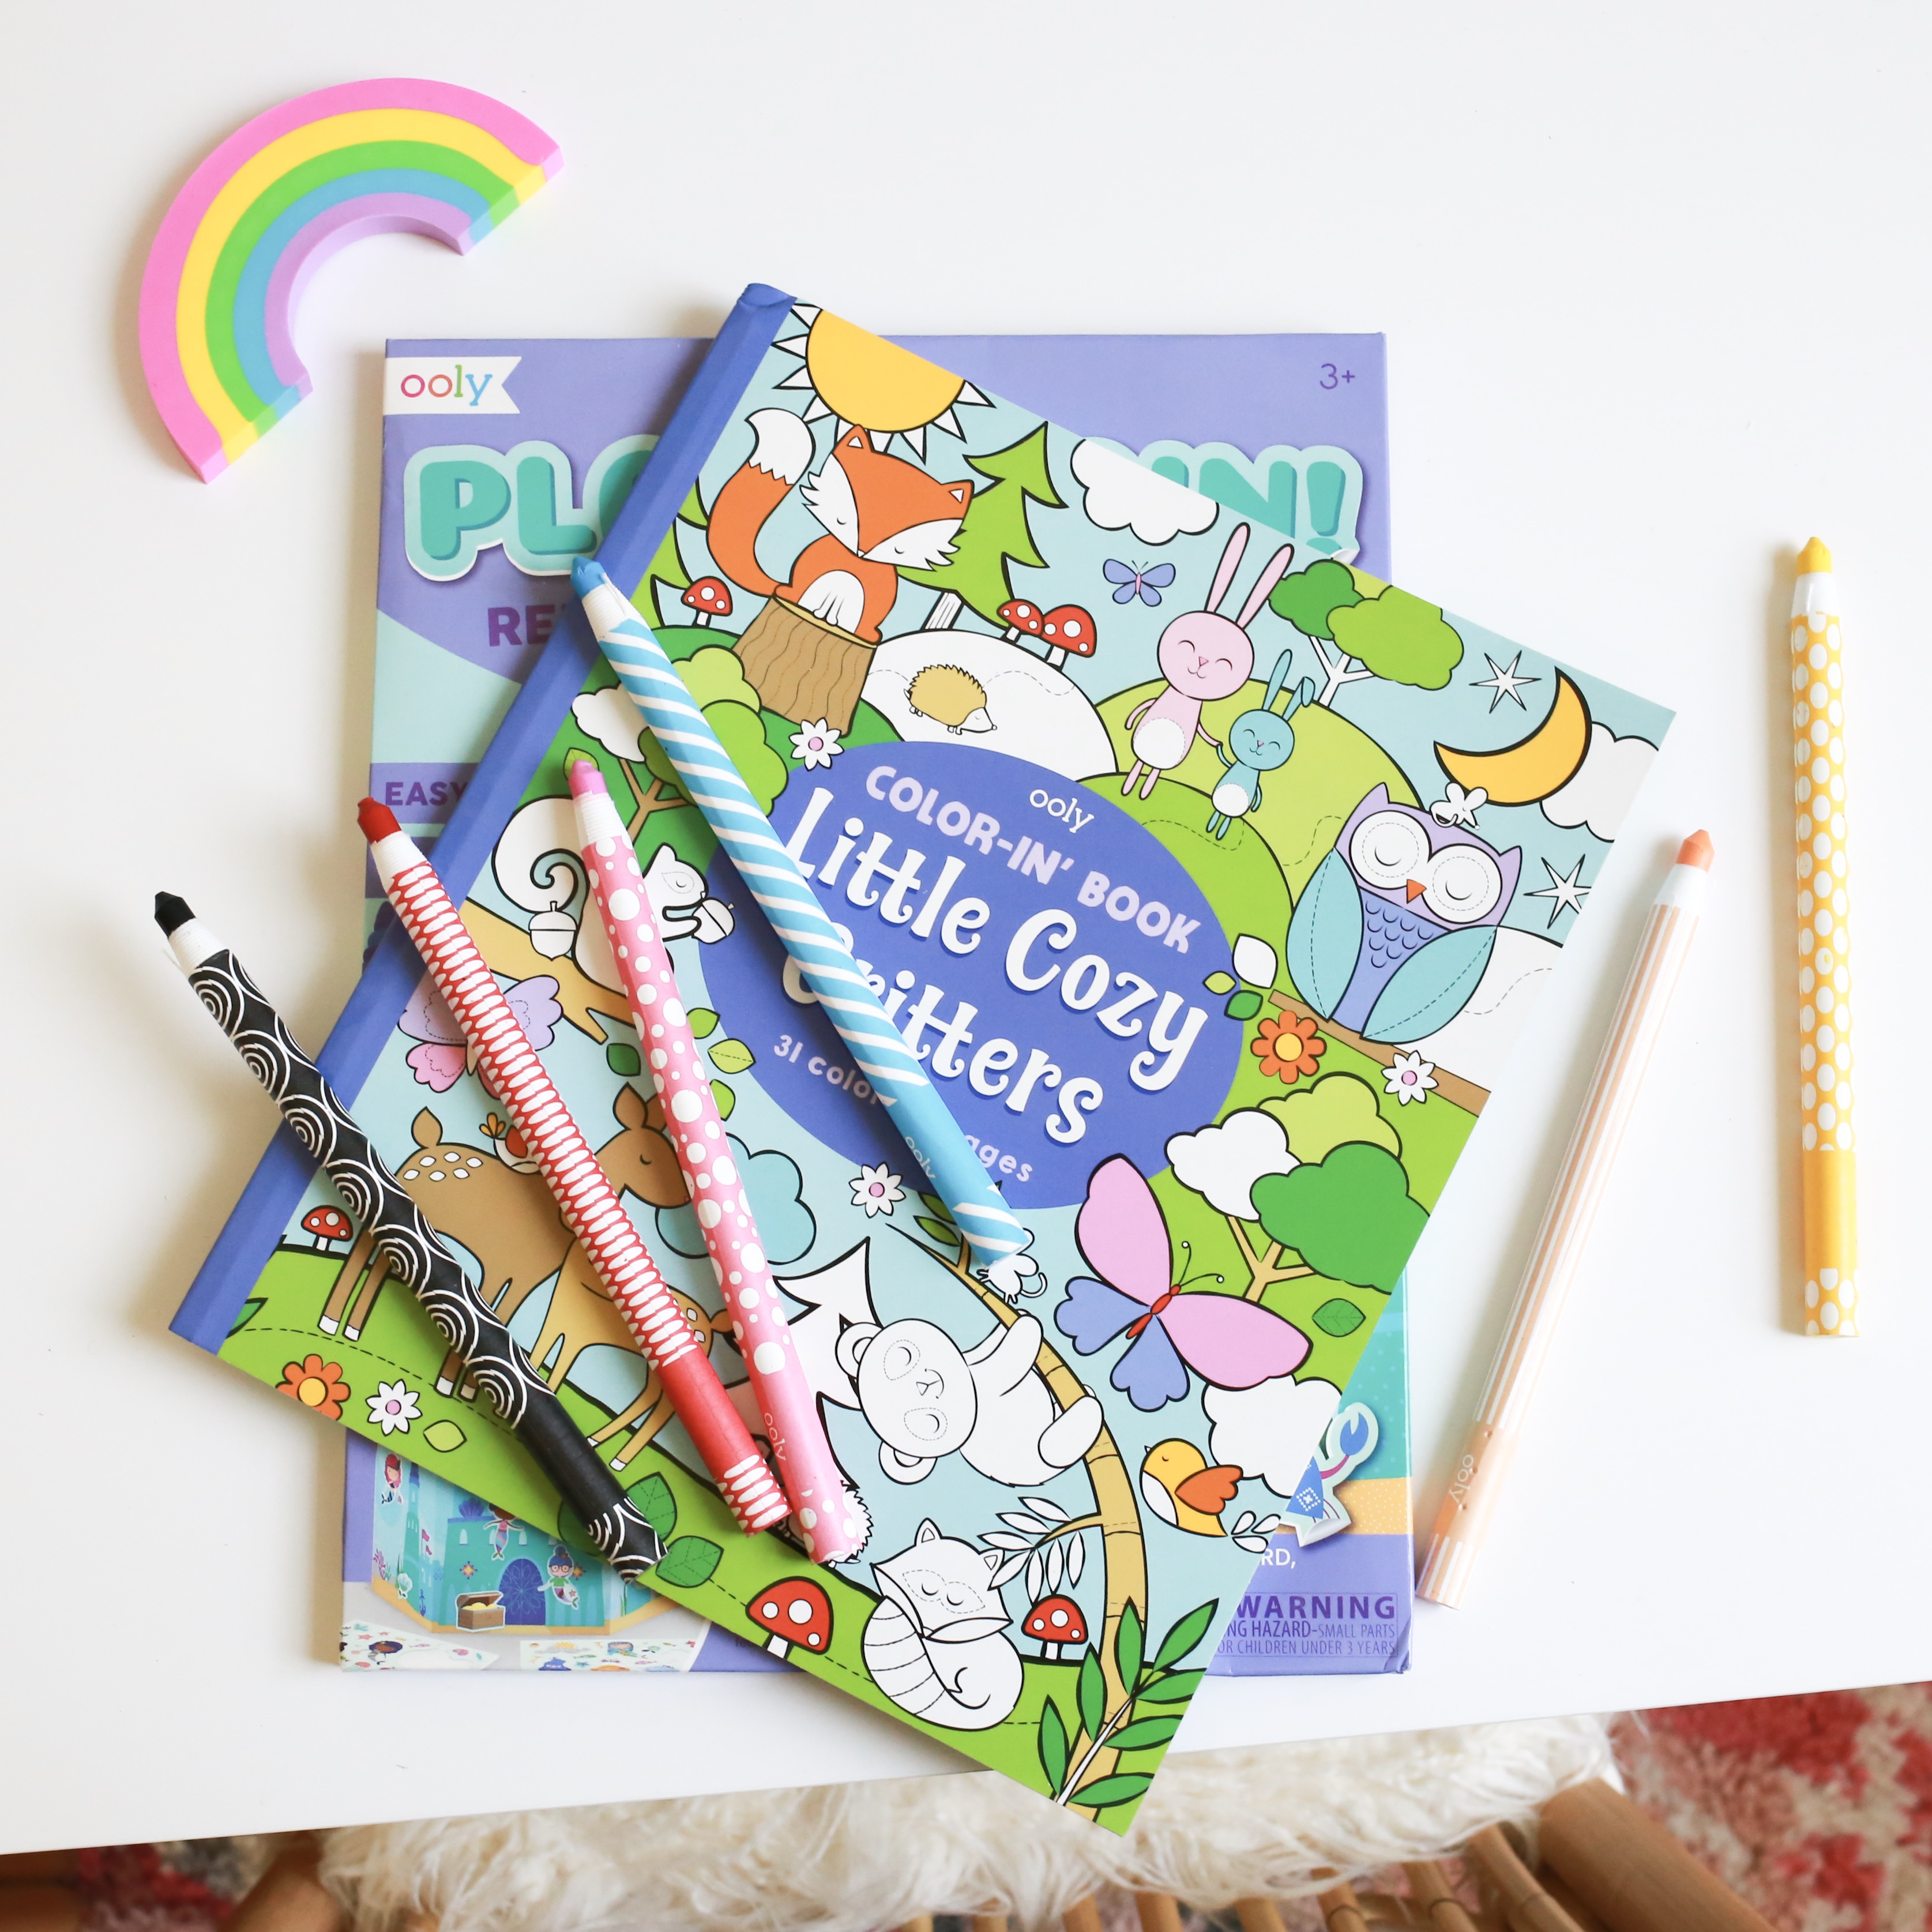 Ooly art supplies, coloring books for kids